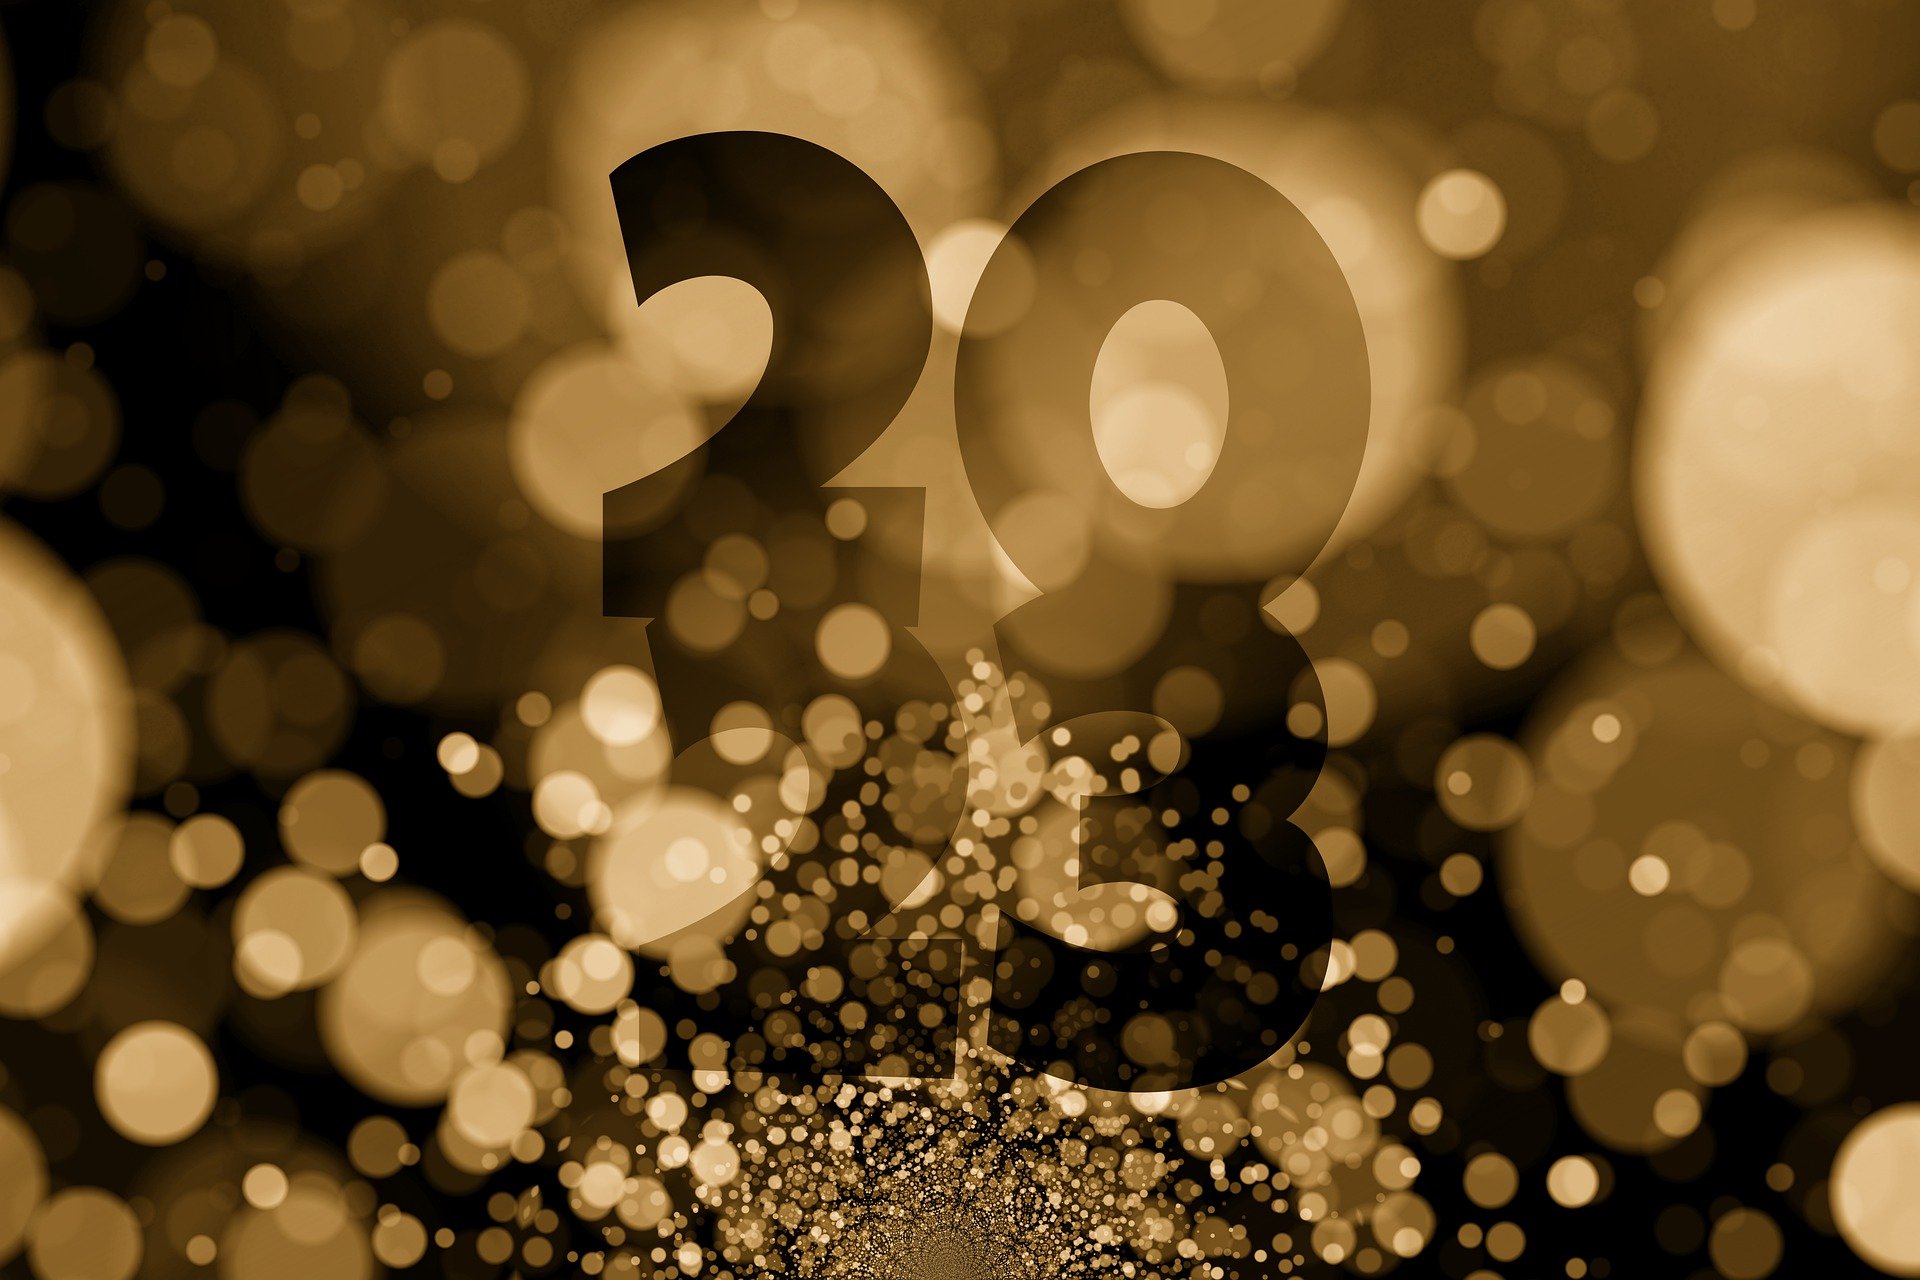 new-years-day-g38210a335_1920 (c) pixabay.com